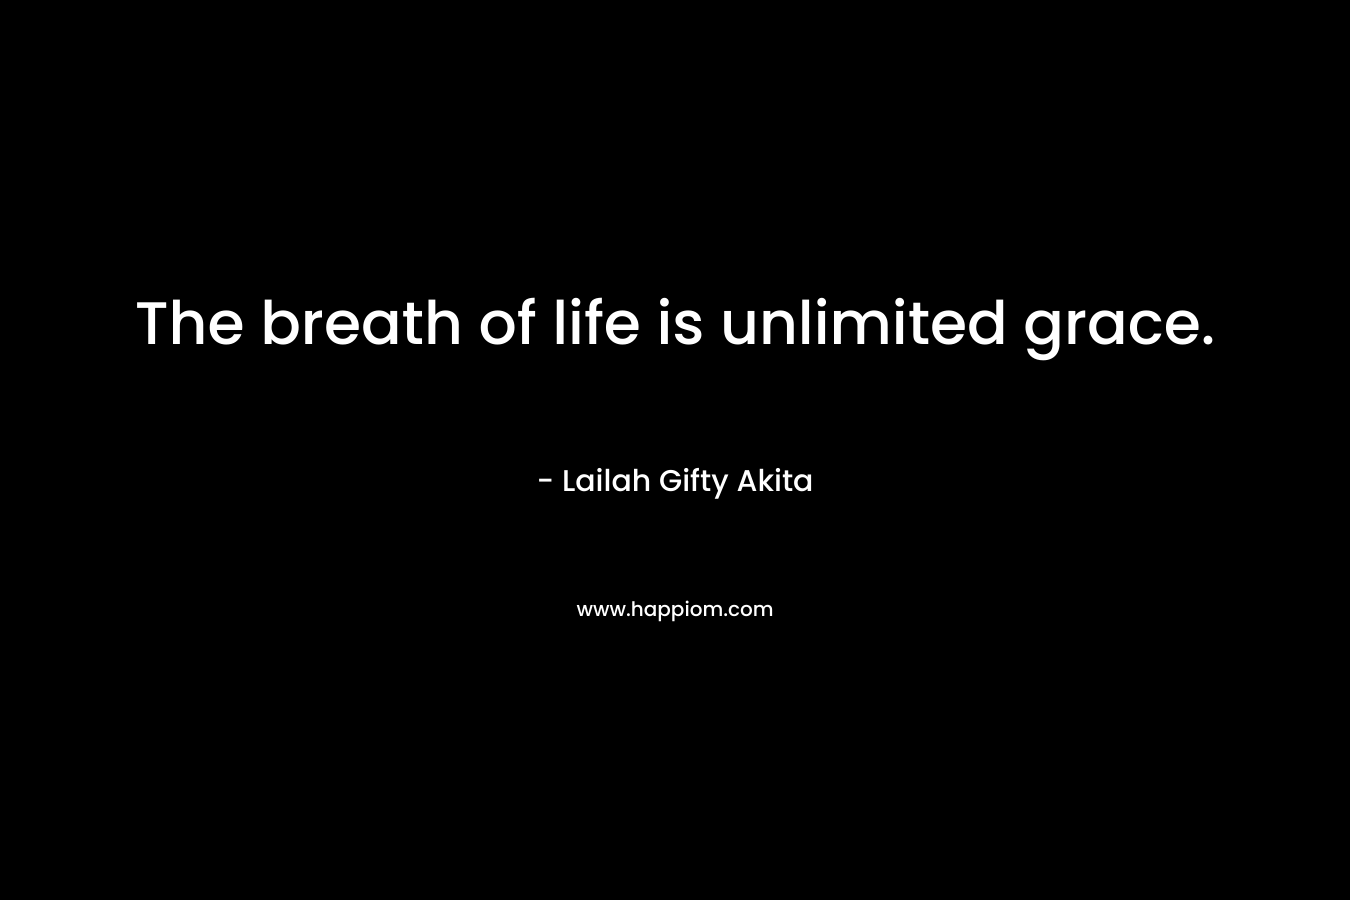 The breath of life is unlimited grace.